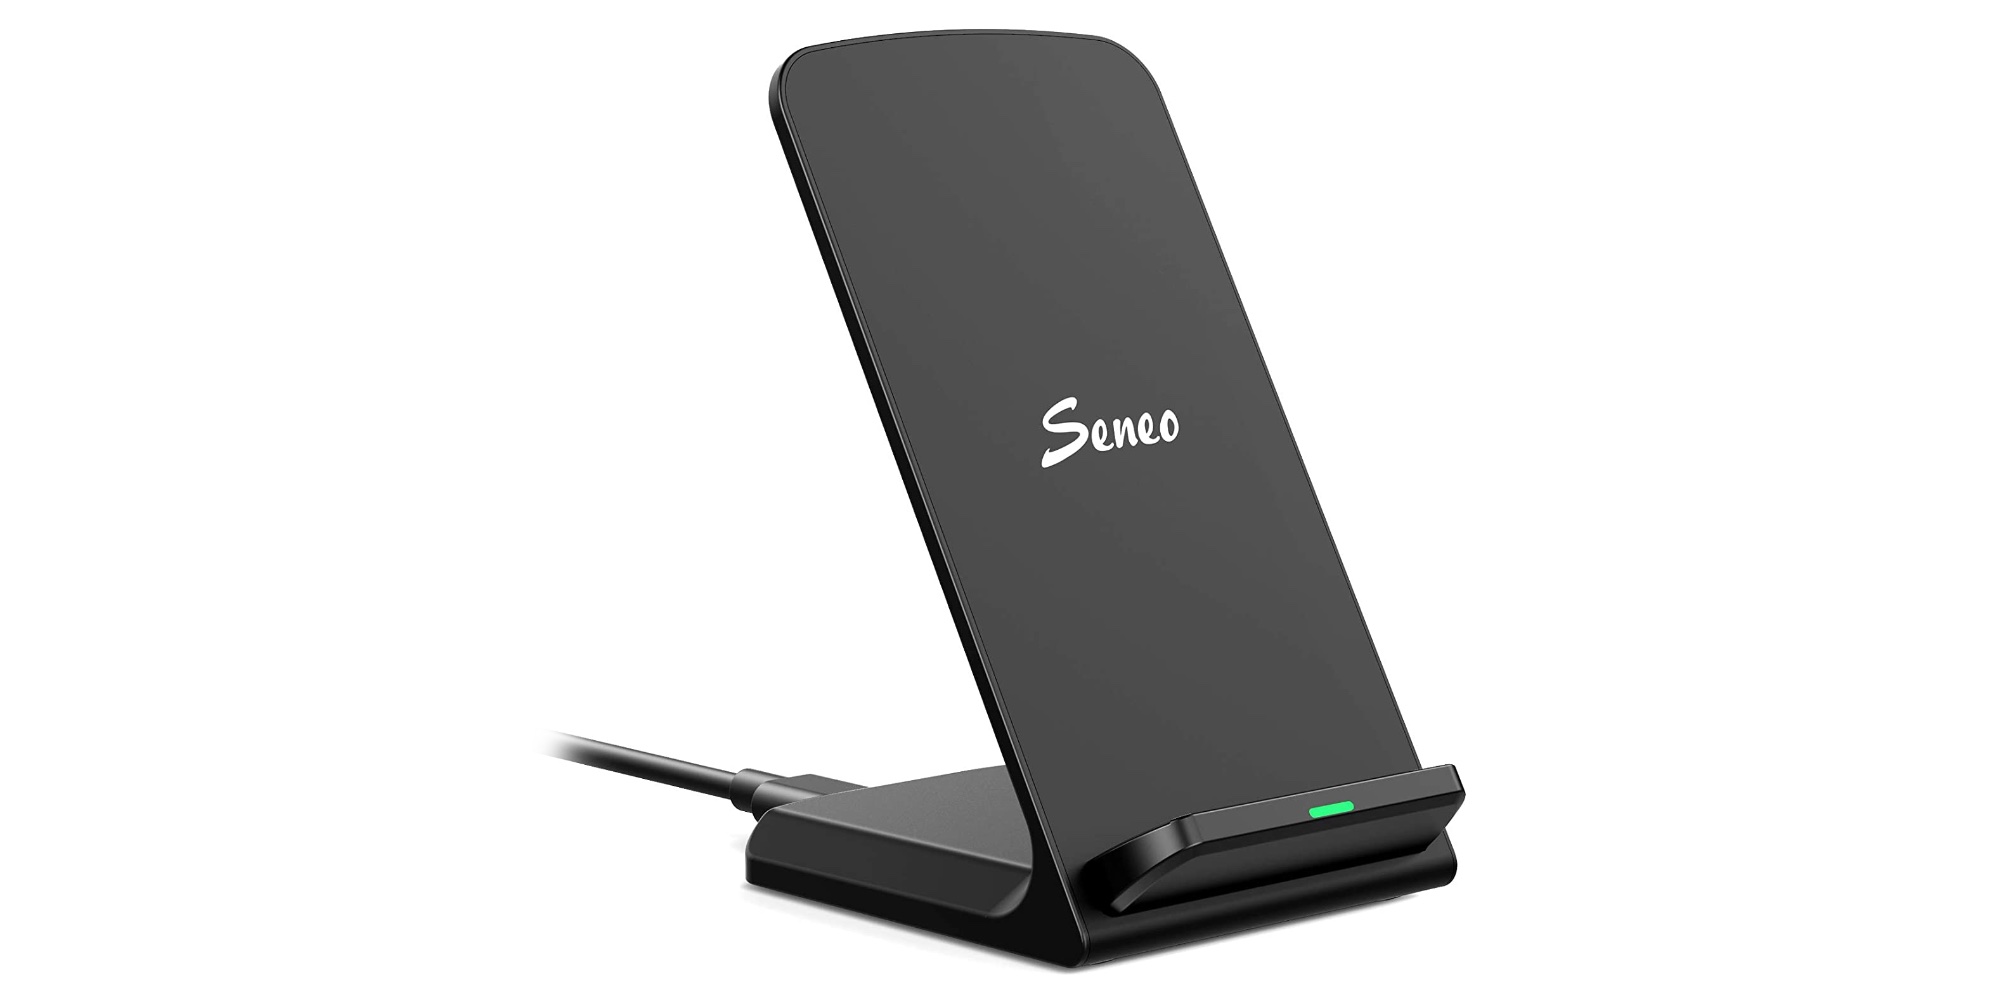 Smartphone Accessories: Seneo 7.5W Qi Charging Stand $9 (Save 40%), more